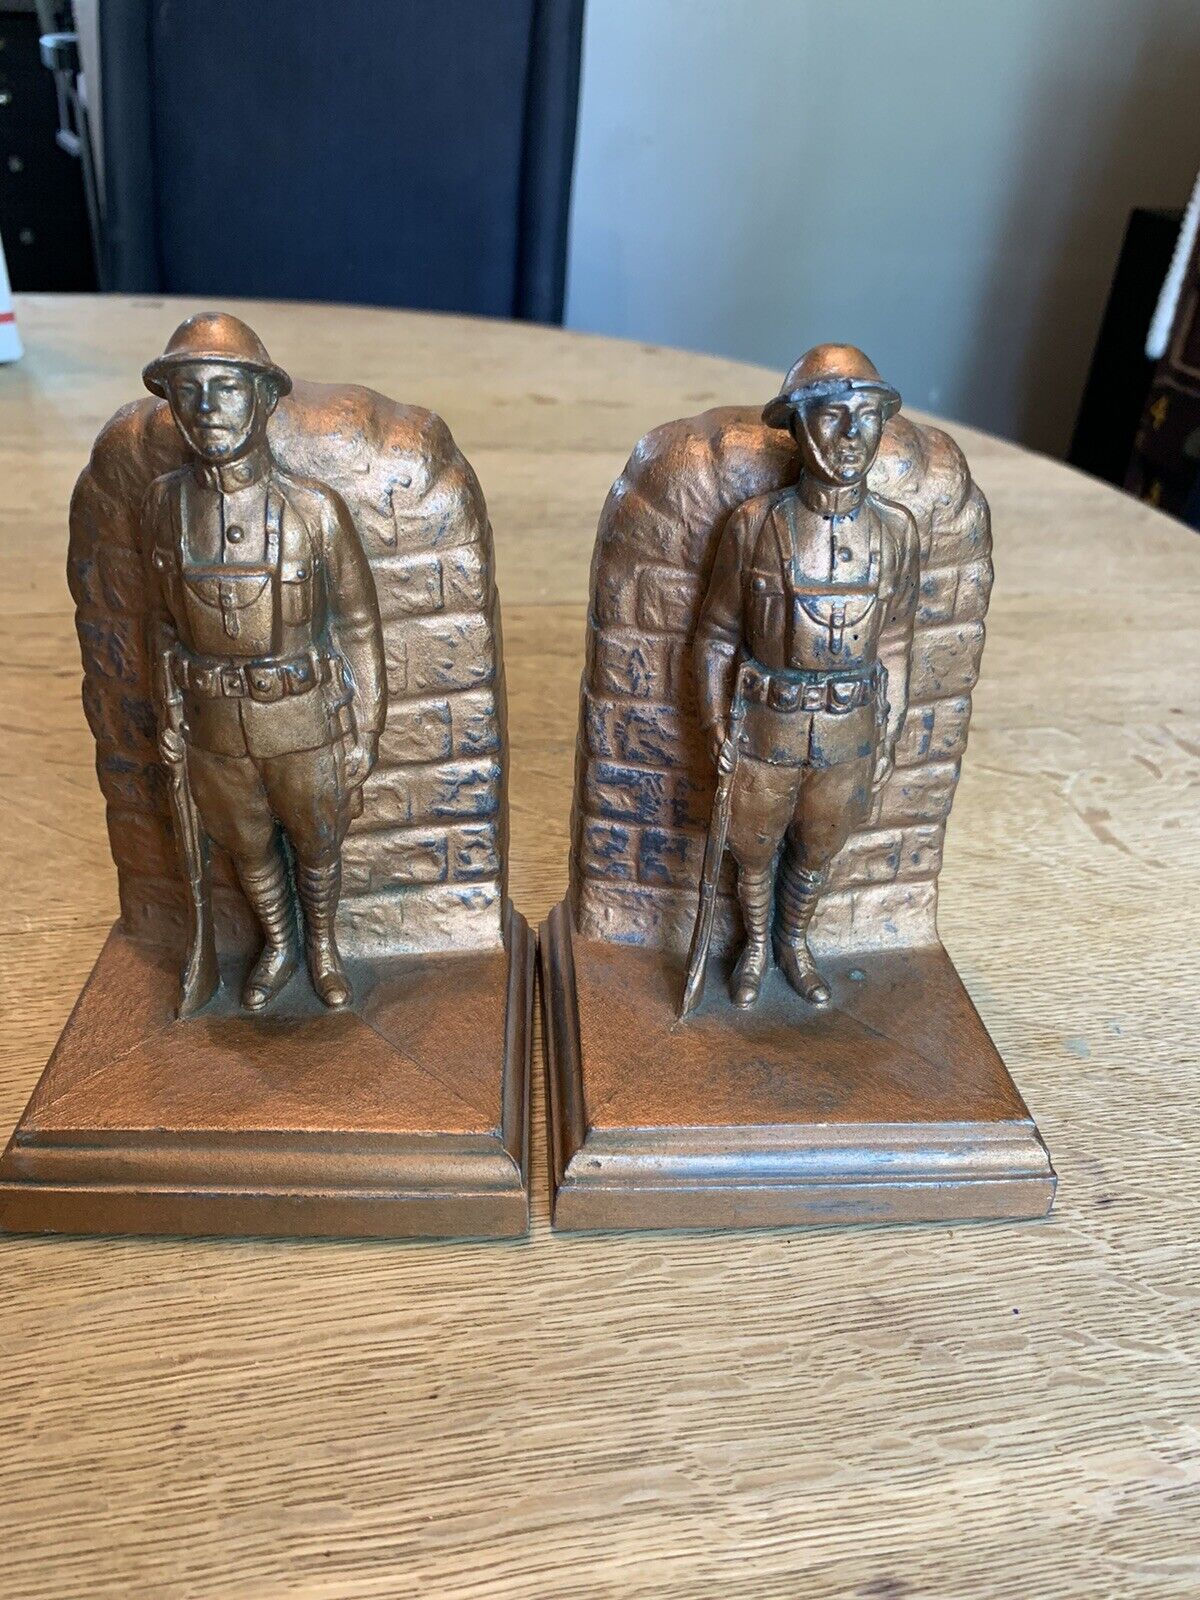 Antique WW1 Ww2 Soldier Bookends